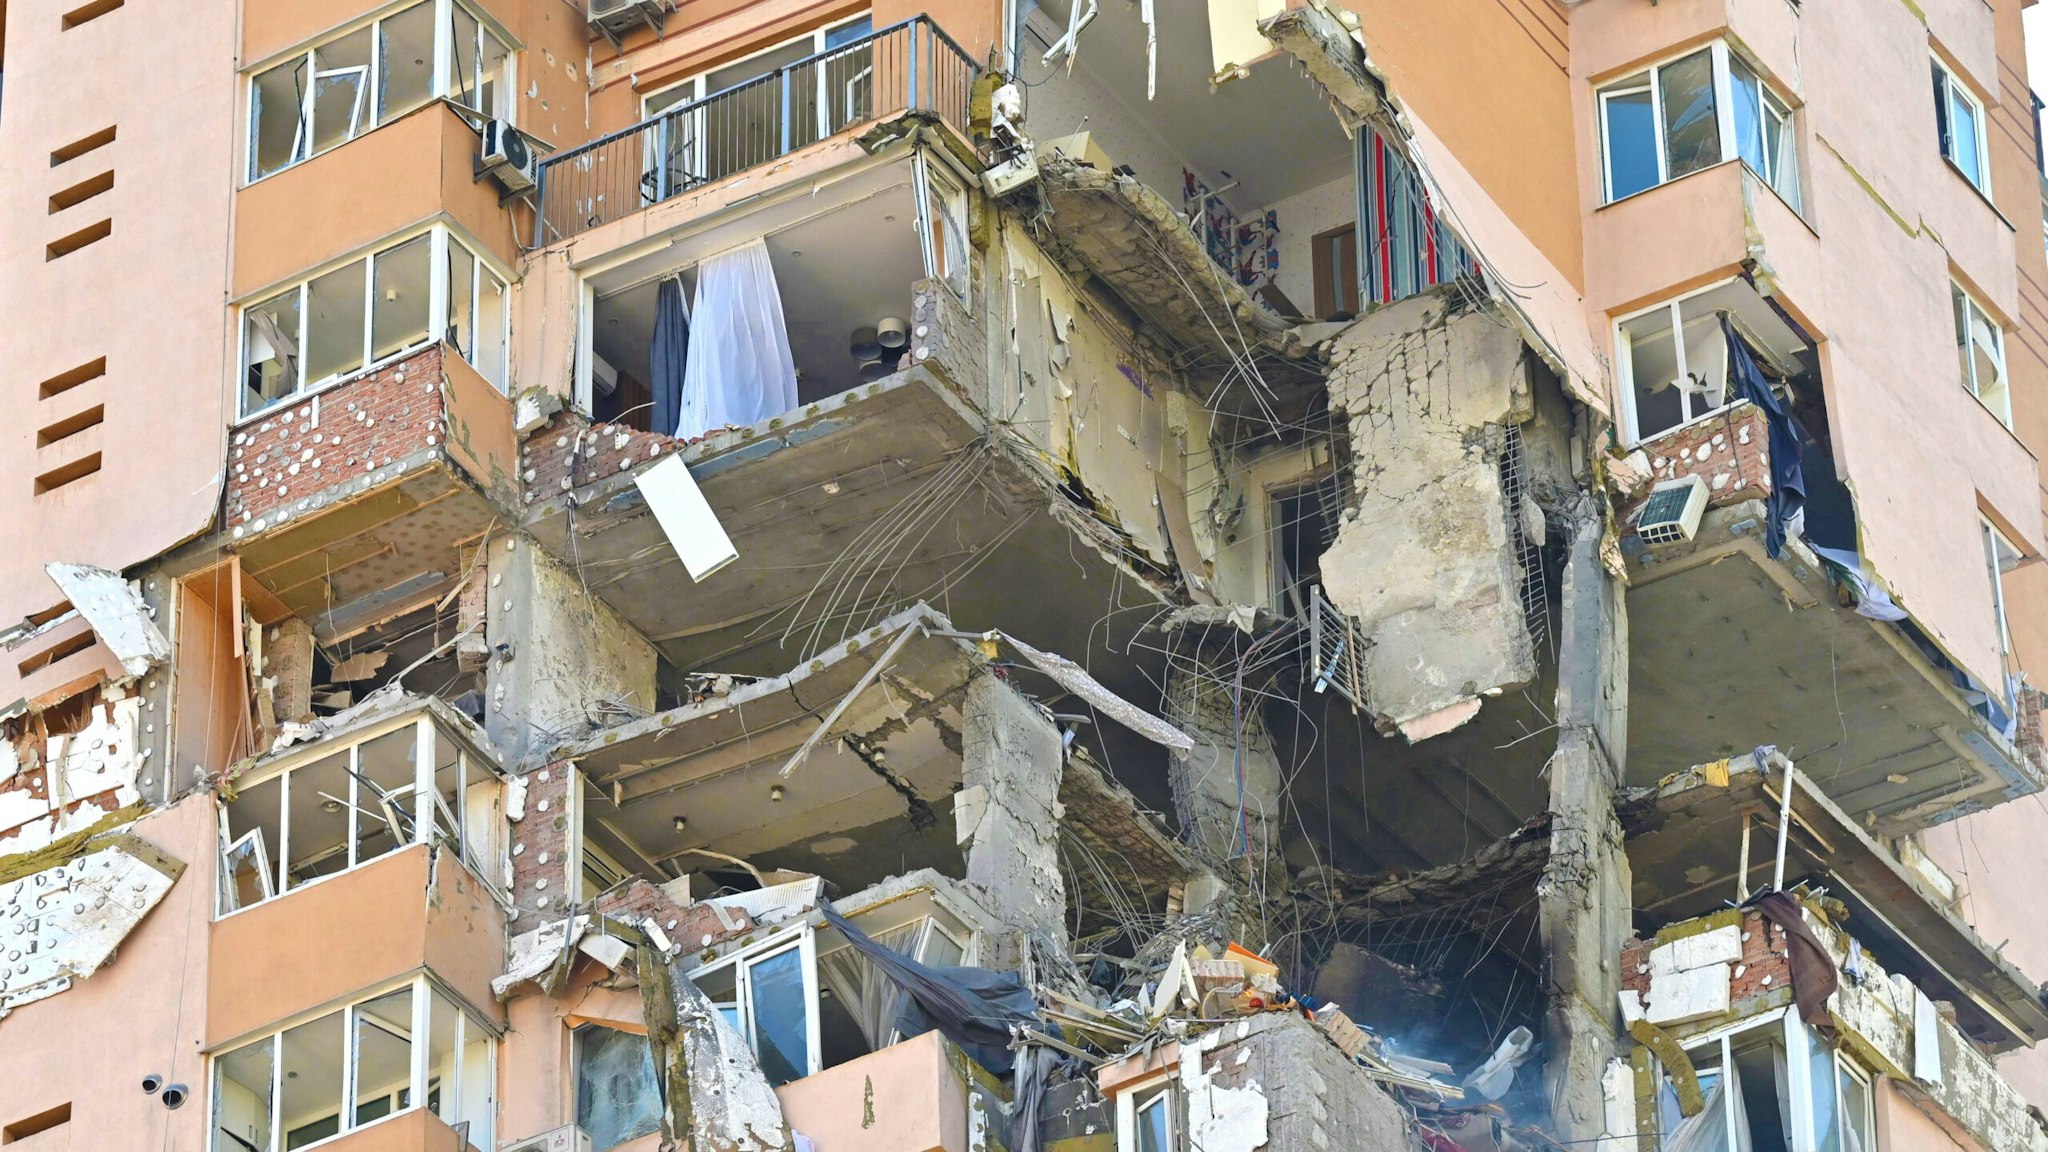 A view of a high-rise apartment block which was hit by recent shelling in Kyiv on February 26, 2022. - Ukrainian soldiers repulsed a Russian attack in the capital, the military said on February 26 after a defiant President Volodymyr Zelensky vowed his pro-Western country would not be bowed by Moscow. It started the third day since Russian leader Vladimir Putin unleashed a full-scale invasion that has killed dozens of people, forced more than 50,000 to flee Ukraine in just 48 hours and sparked fears of a wider conflict in Europe.